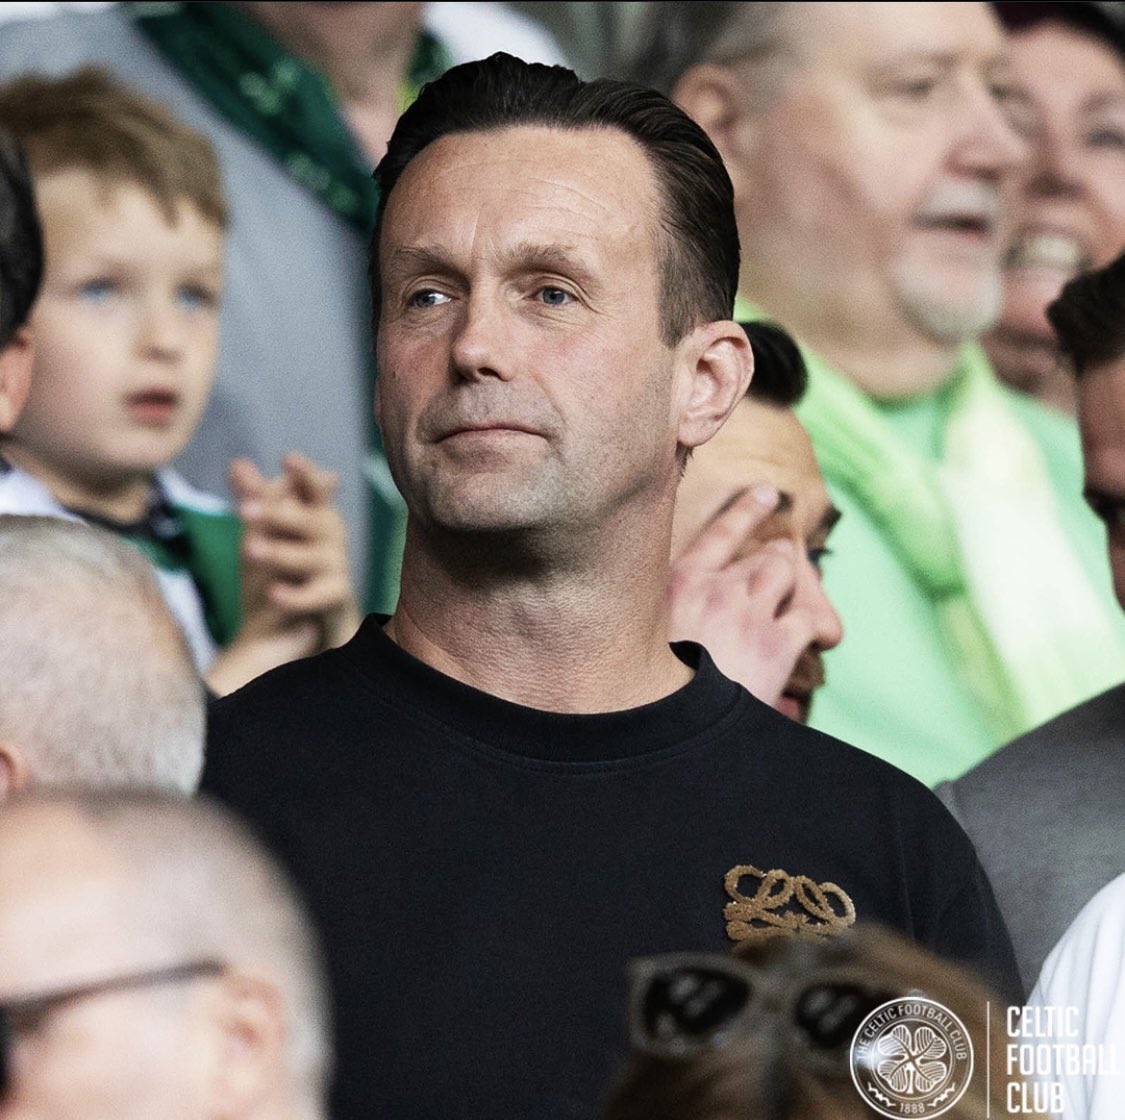 Ronny doing what “Celtic man” Neil Lennon never could… attend a game he wasn’t being paid to be at. 

Shoulda got him on at FT to give us a roar for old times sake 🥲